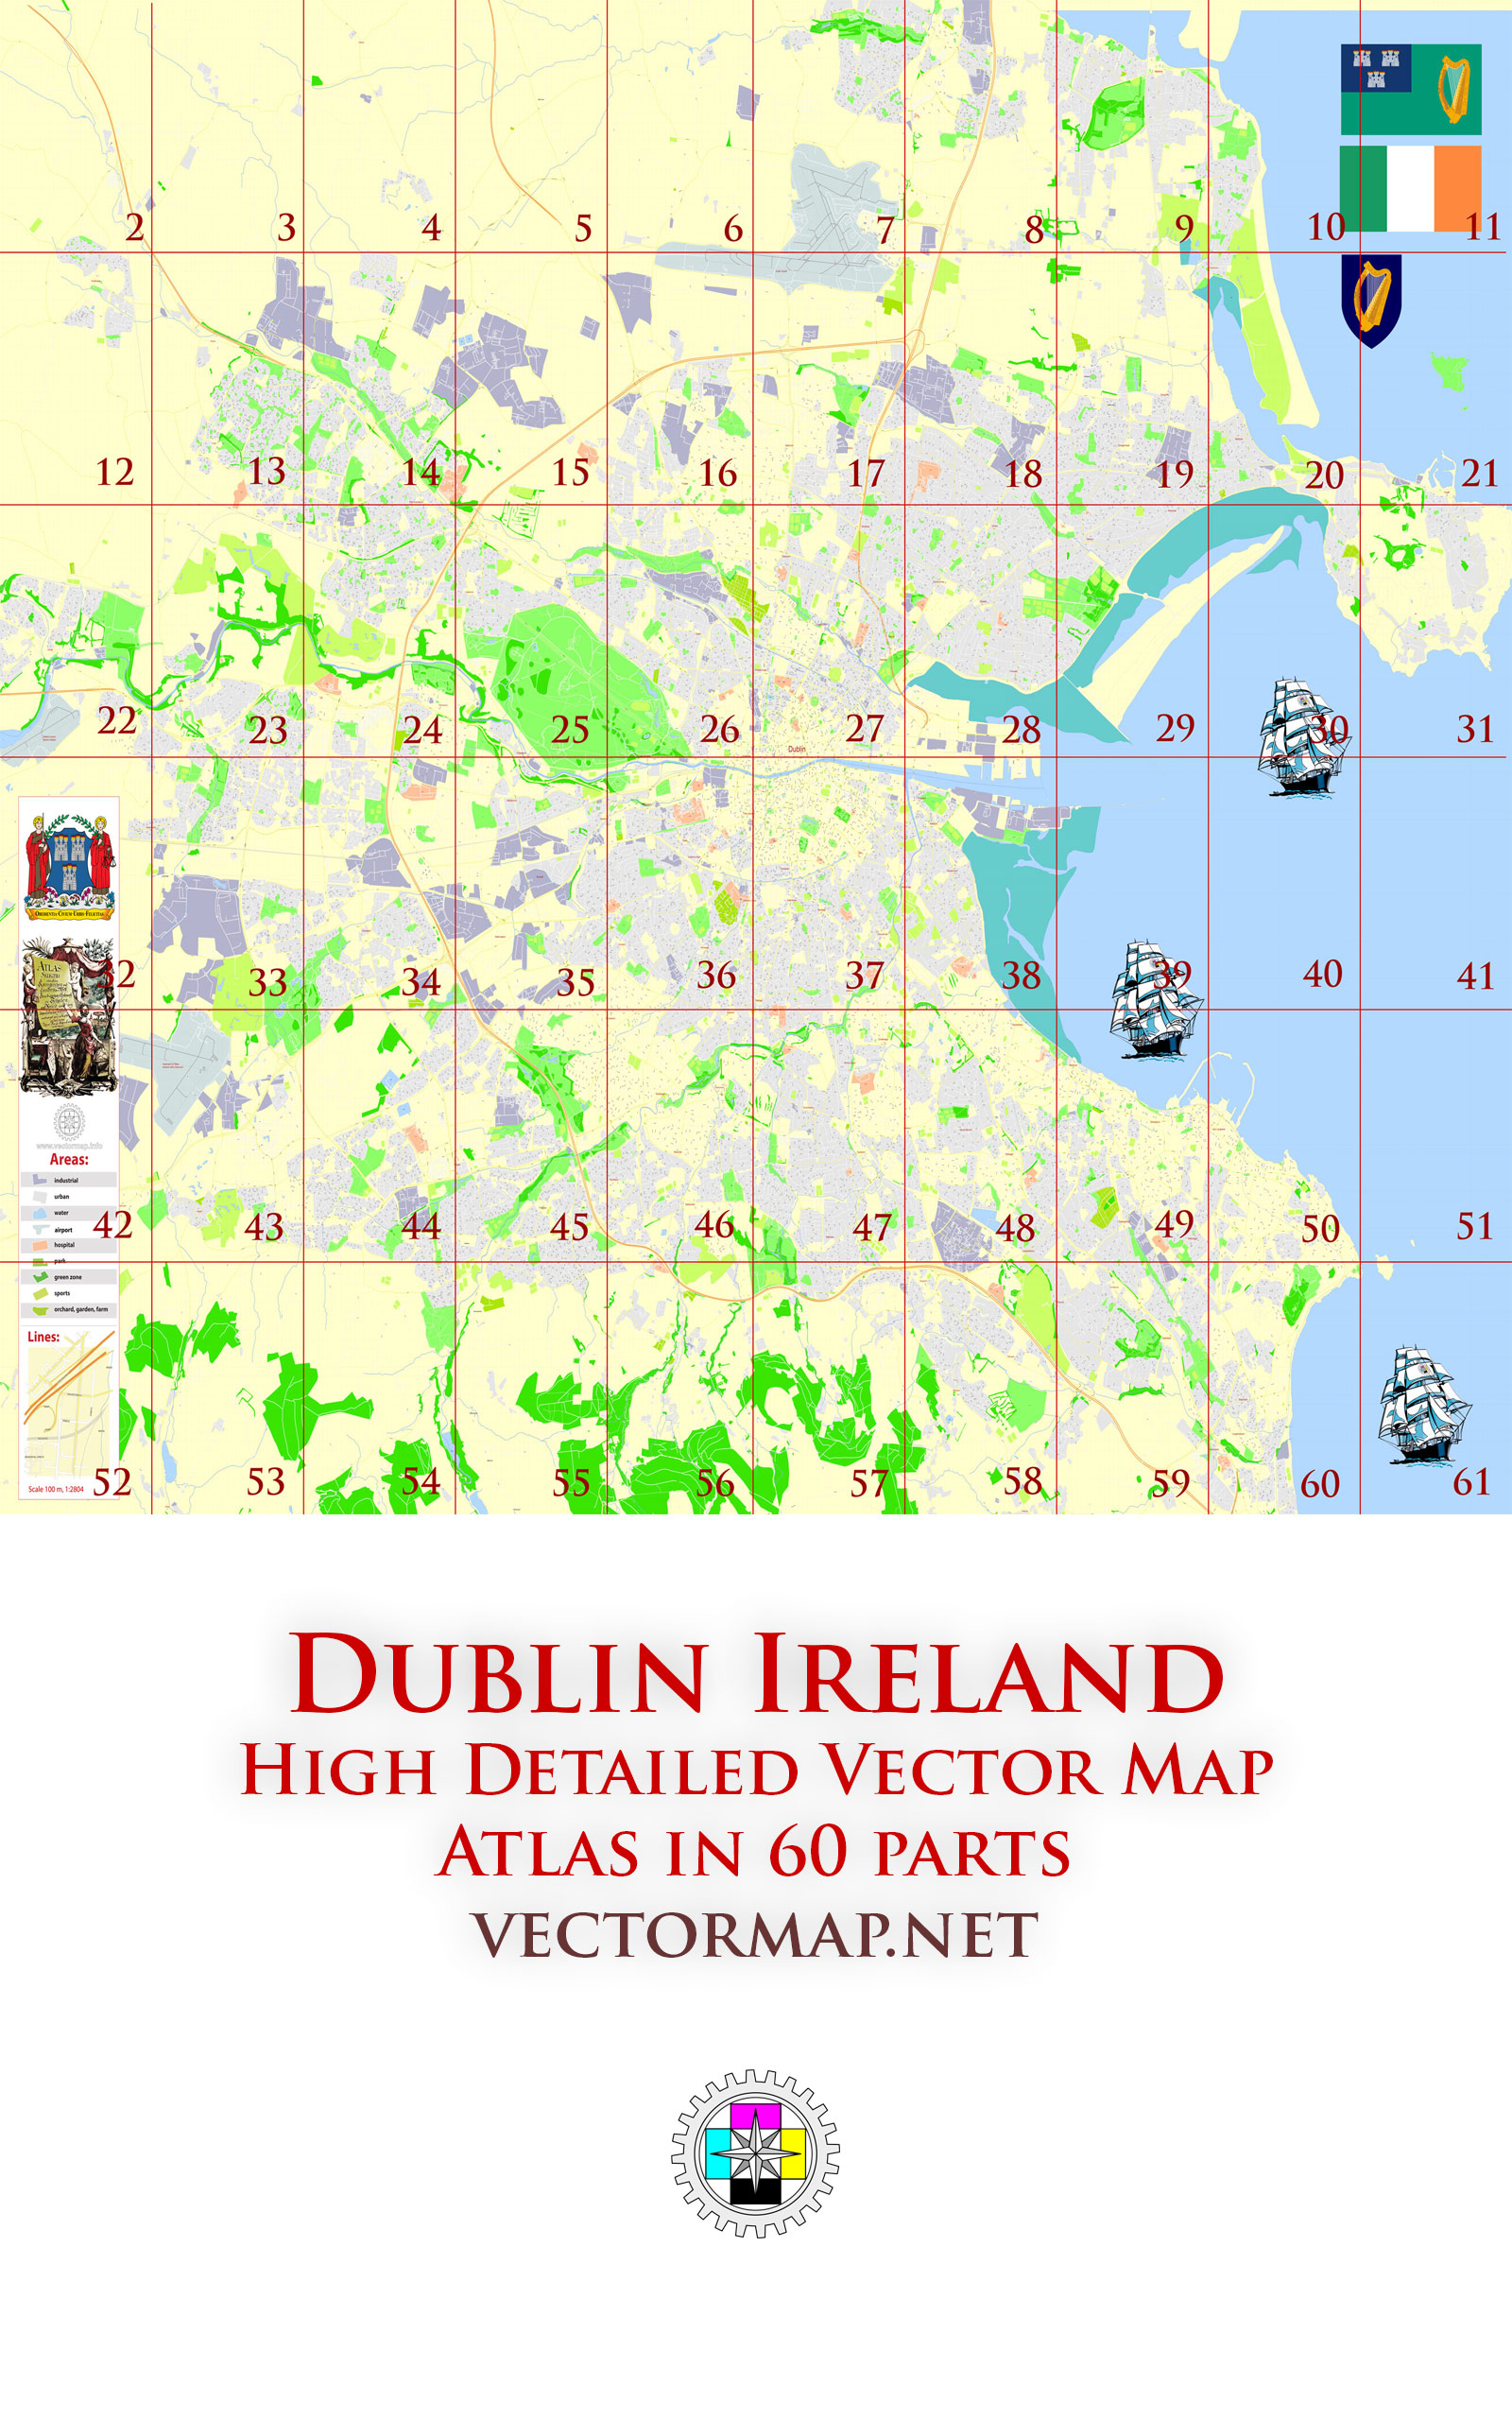 Dublin Ireland Tourist Map multi-page atlas, contains 60 pages vector PDF